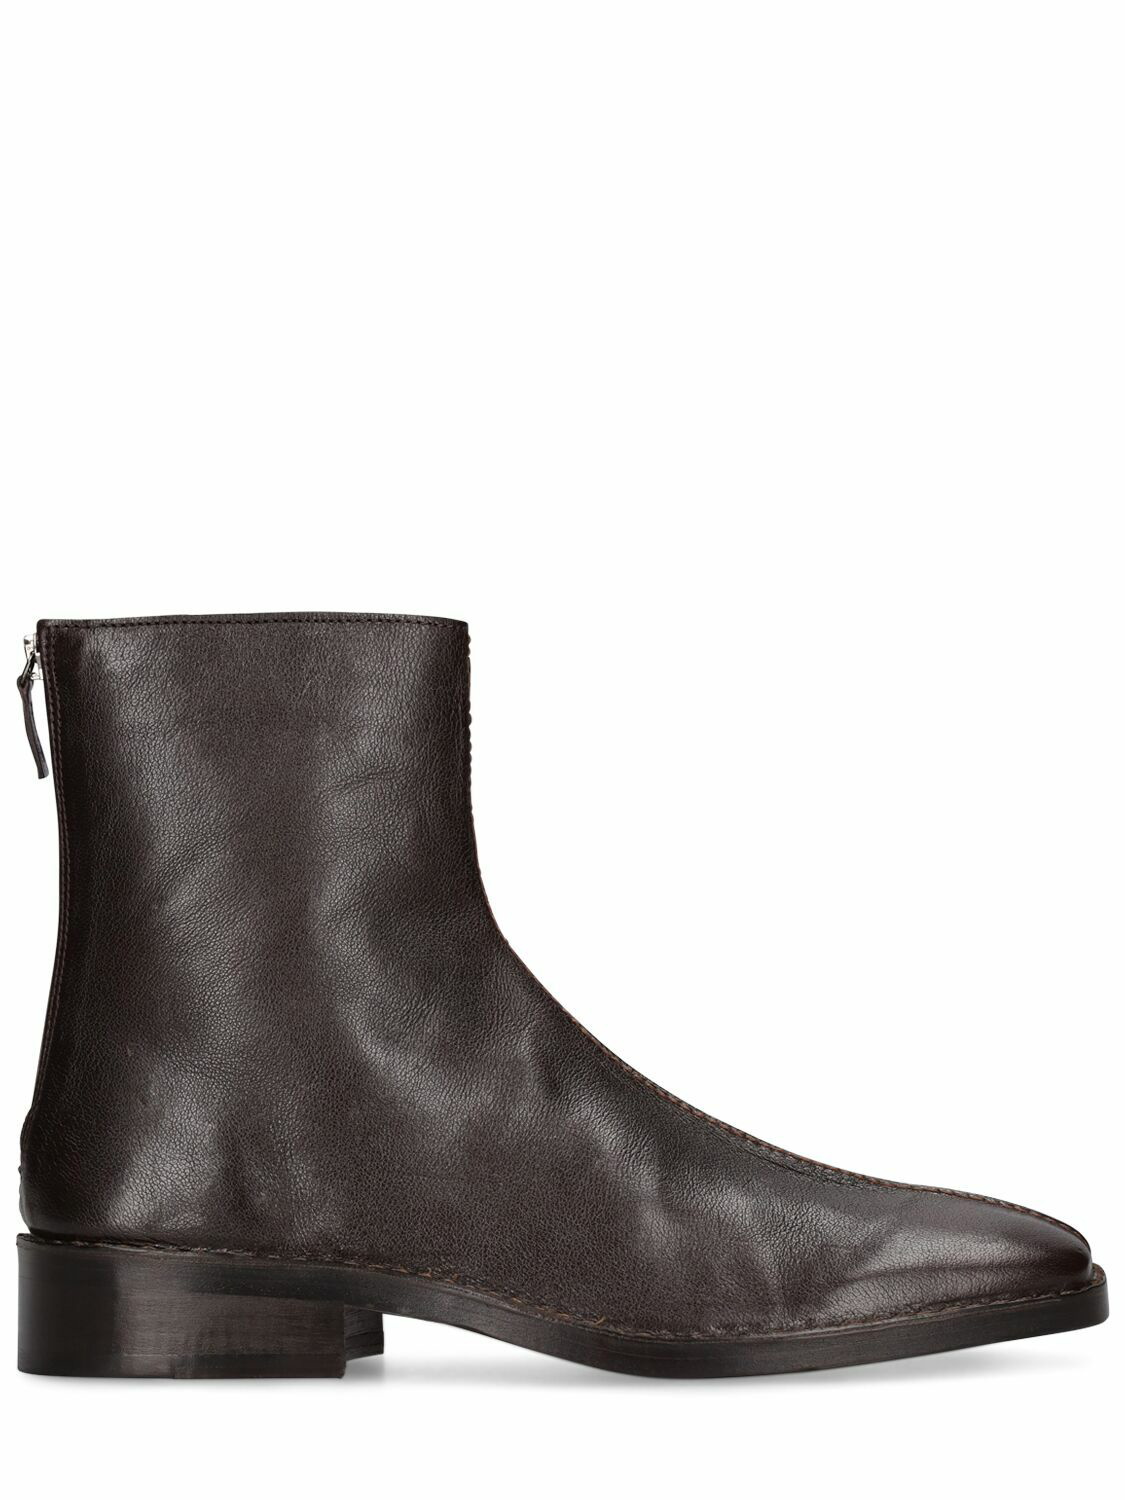 Lemaire Black Zipped Boots Lemaire